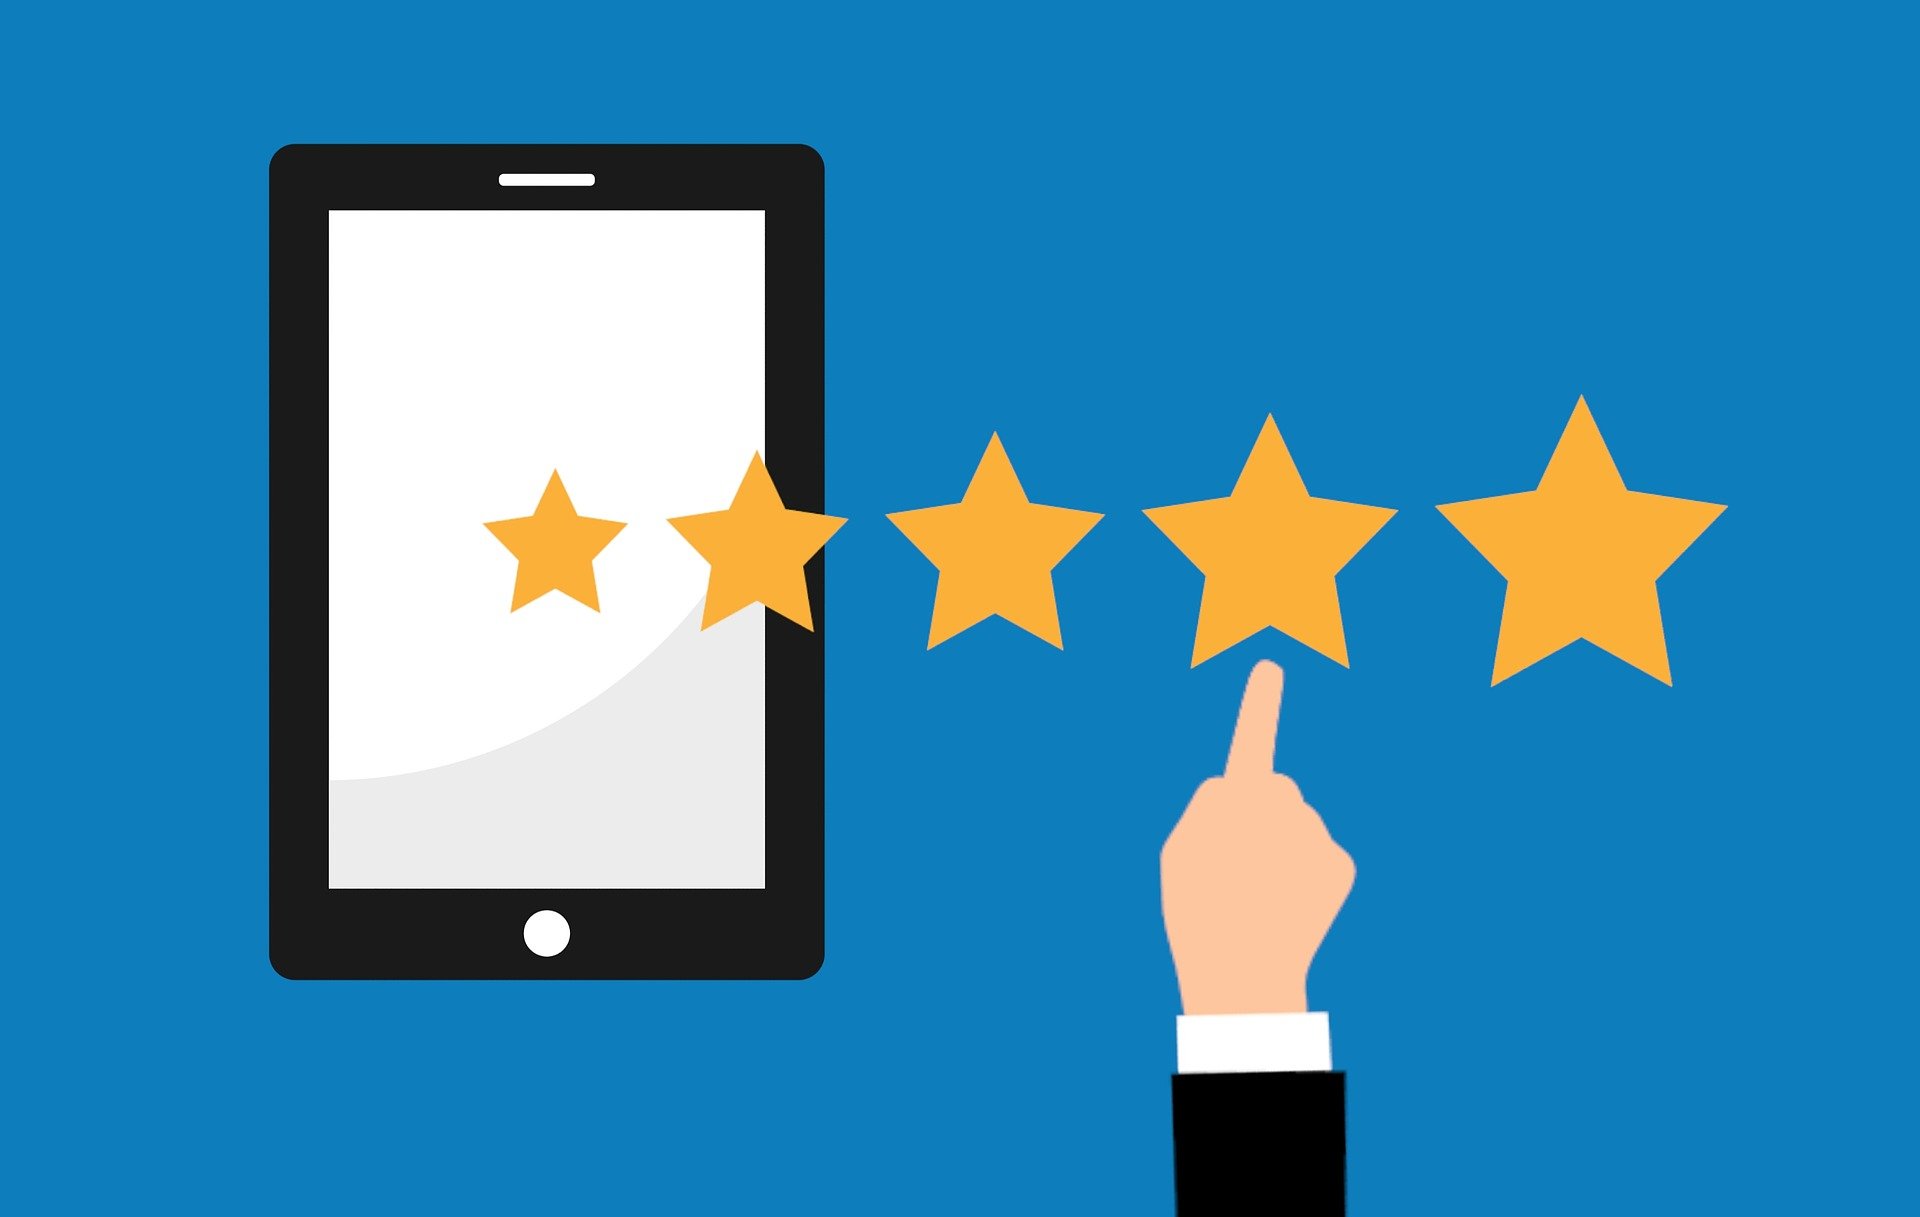 Review of stay at harrogate lifestyle apartments finger pointing to star rating over a mobile device